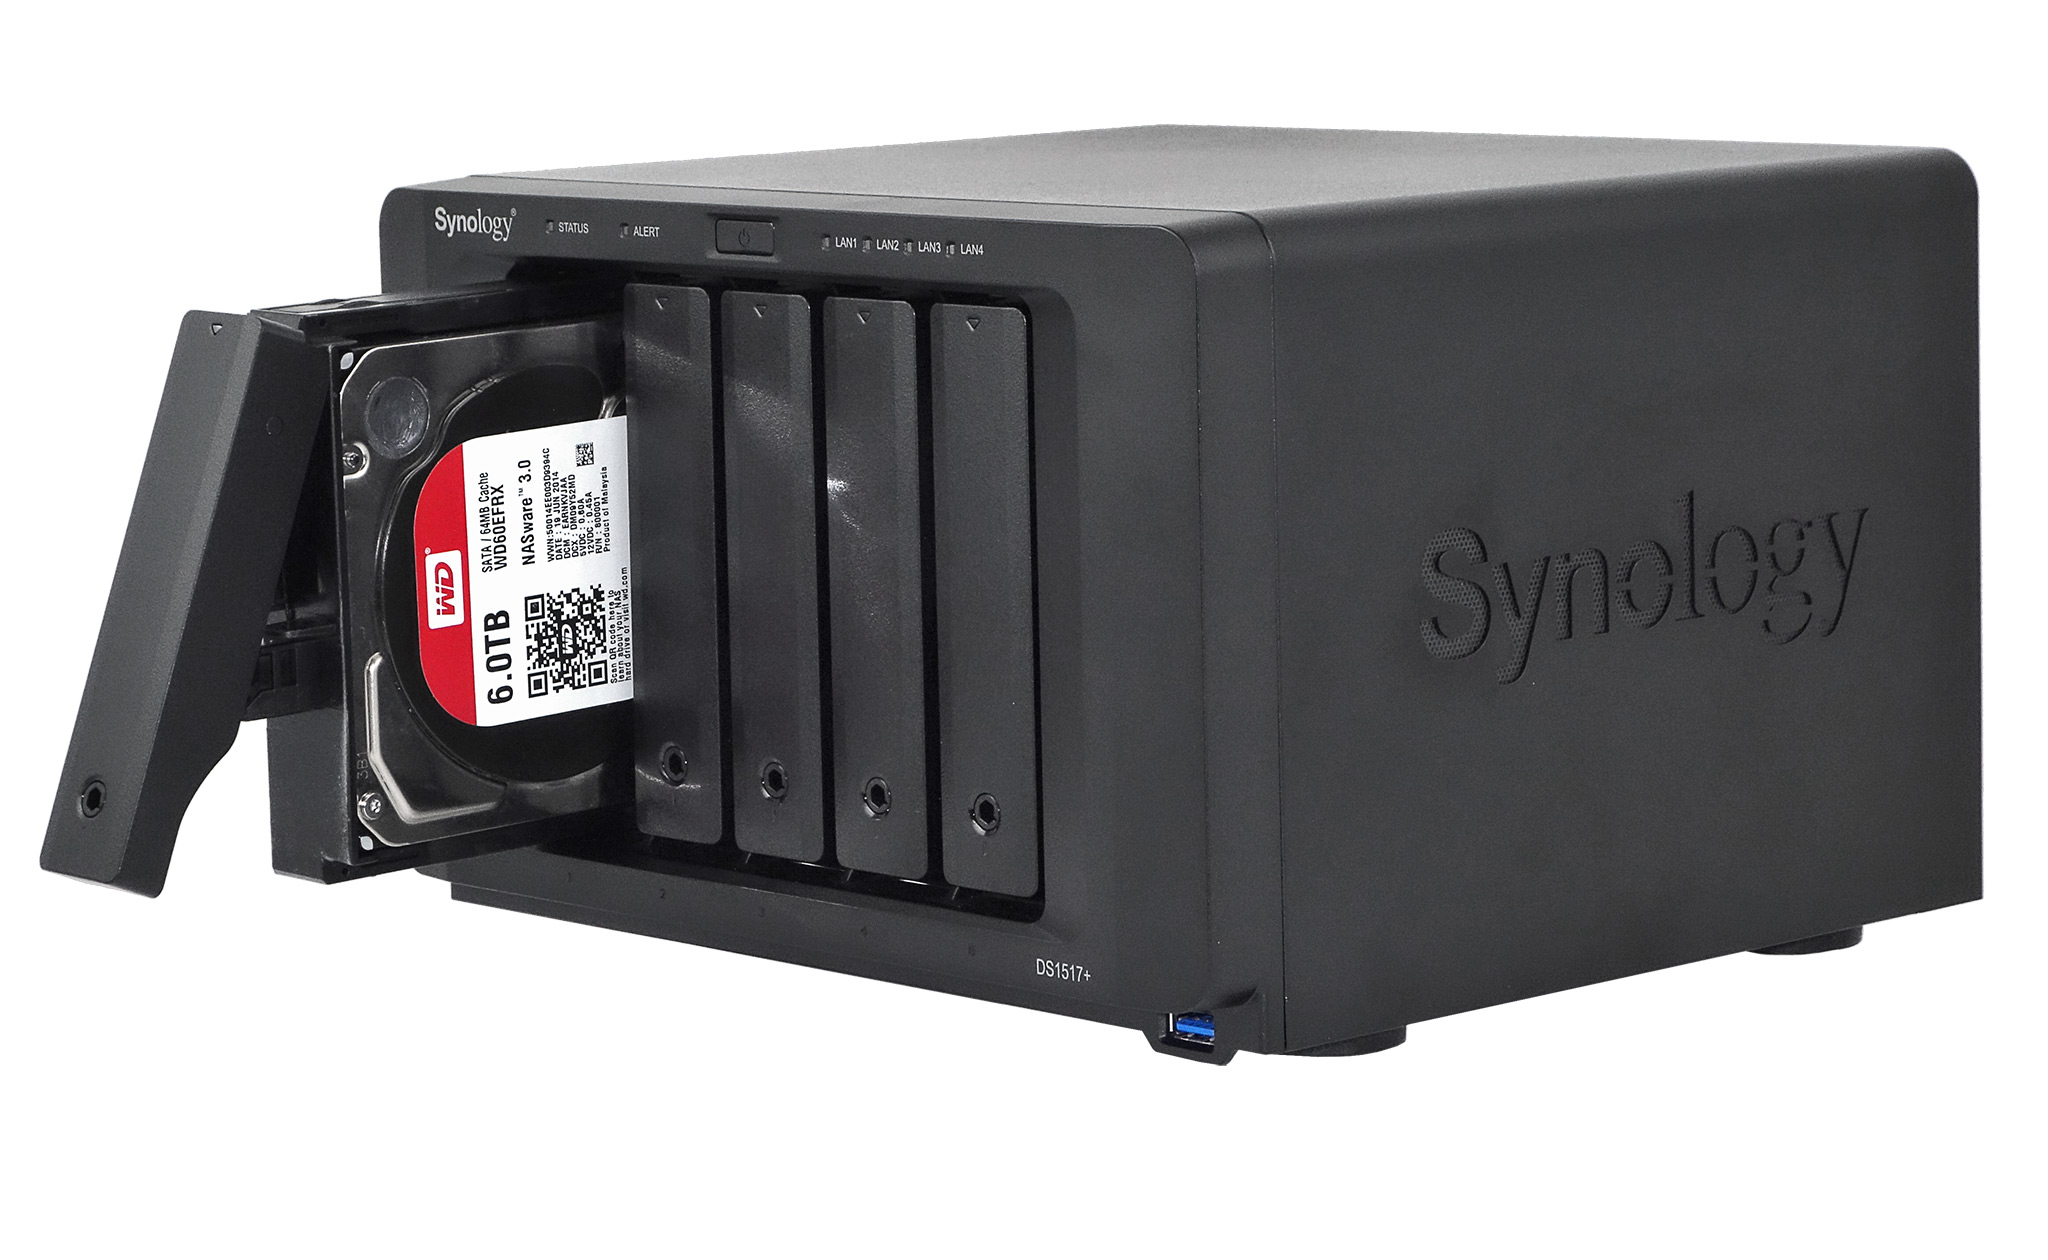 Synology DiskStation DS1517+ (8GB) 5-bay NAS Review